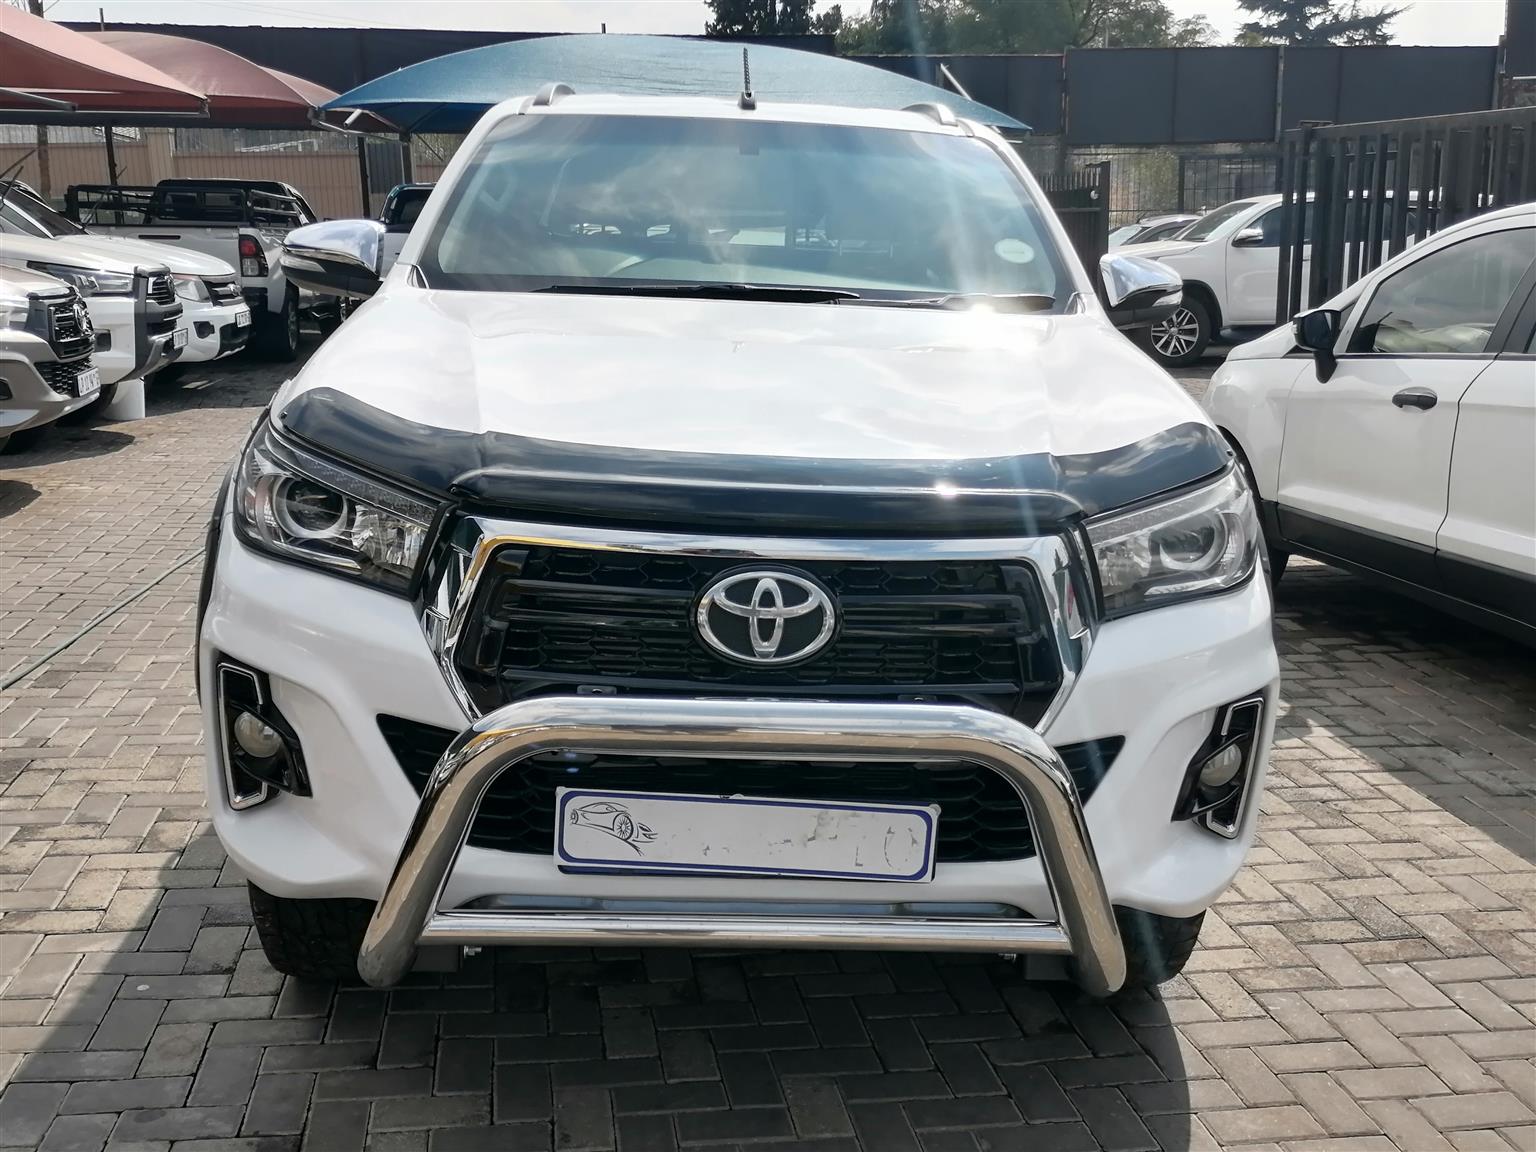 2017 Toyota Hilux 2.8GD-6 Extra Cab Raider Manual For Sale